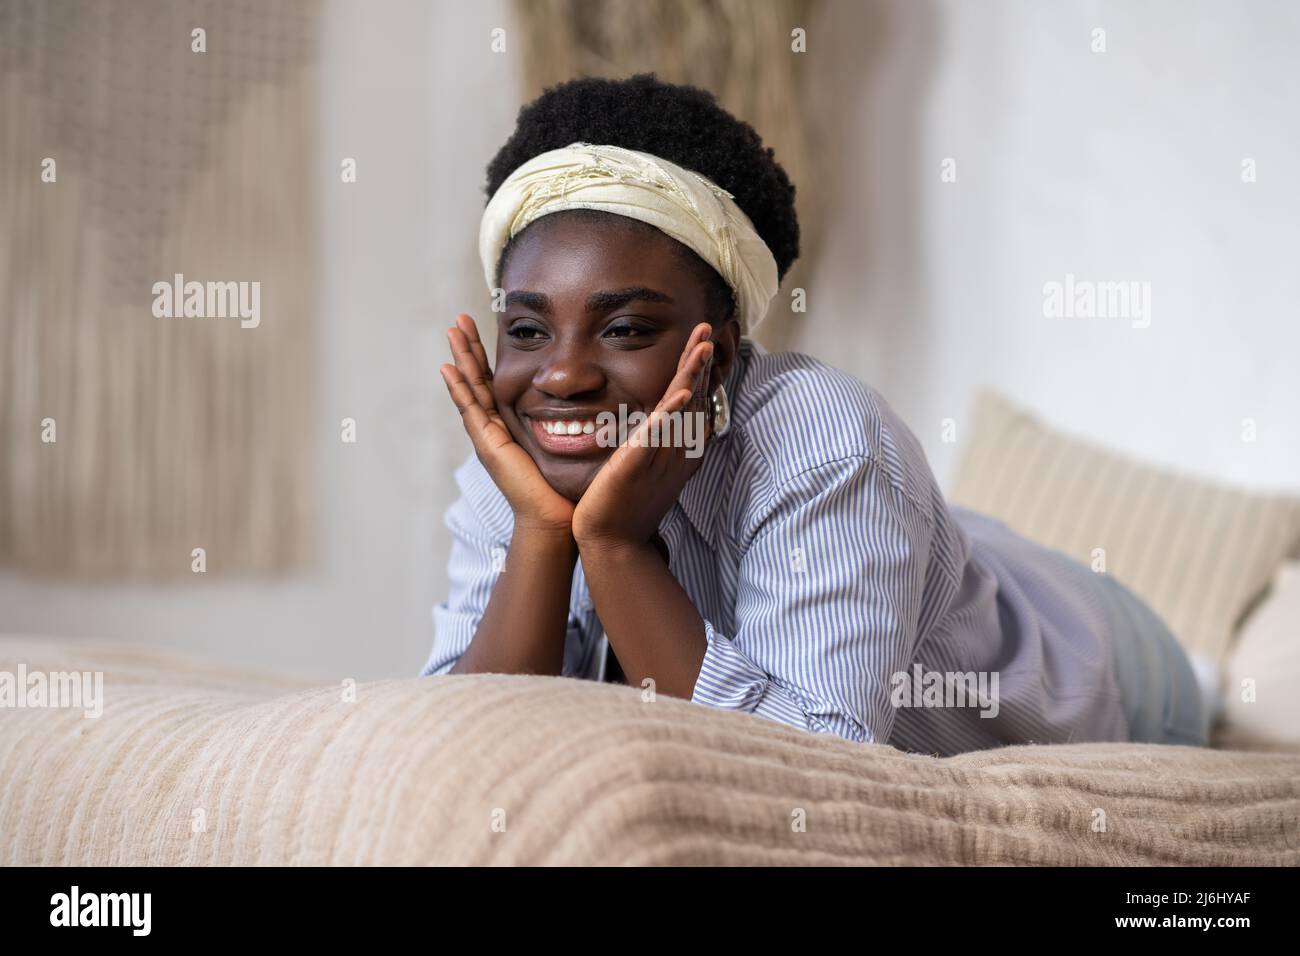 African american woman laying on bed and looking dreamy Stock Photo